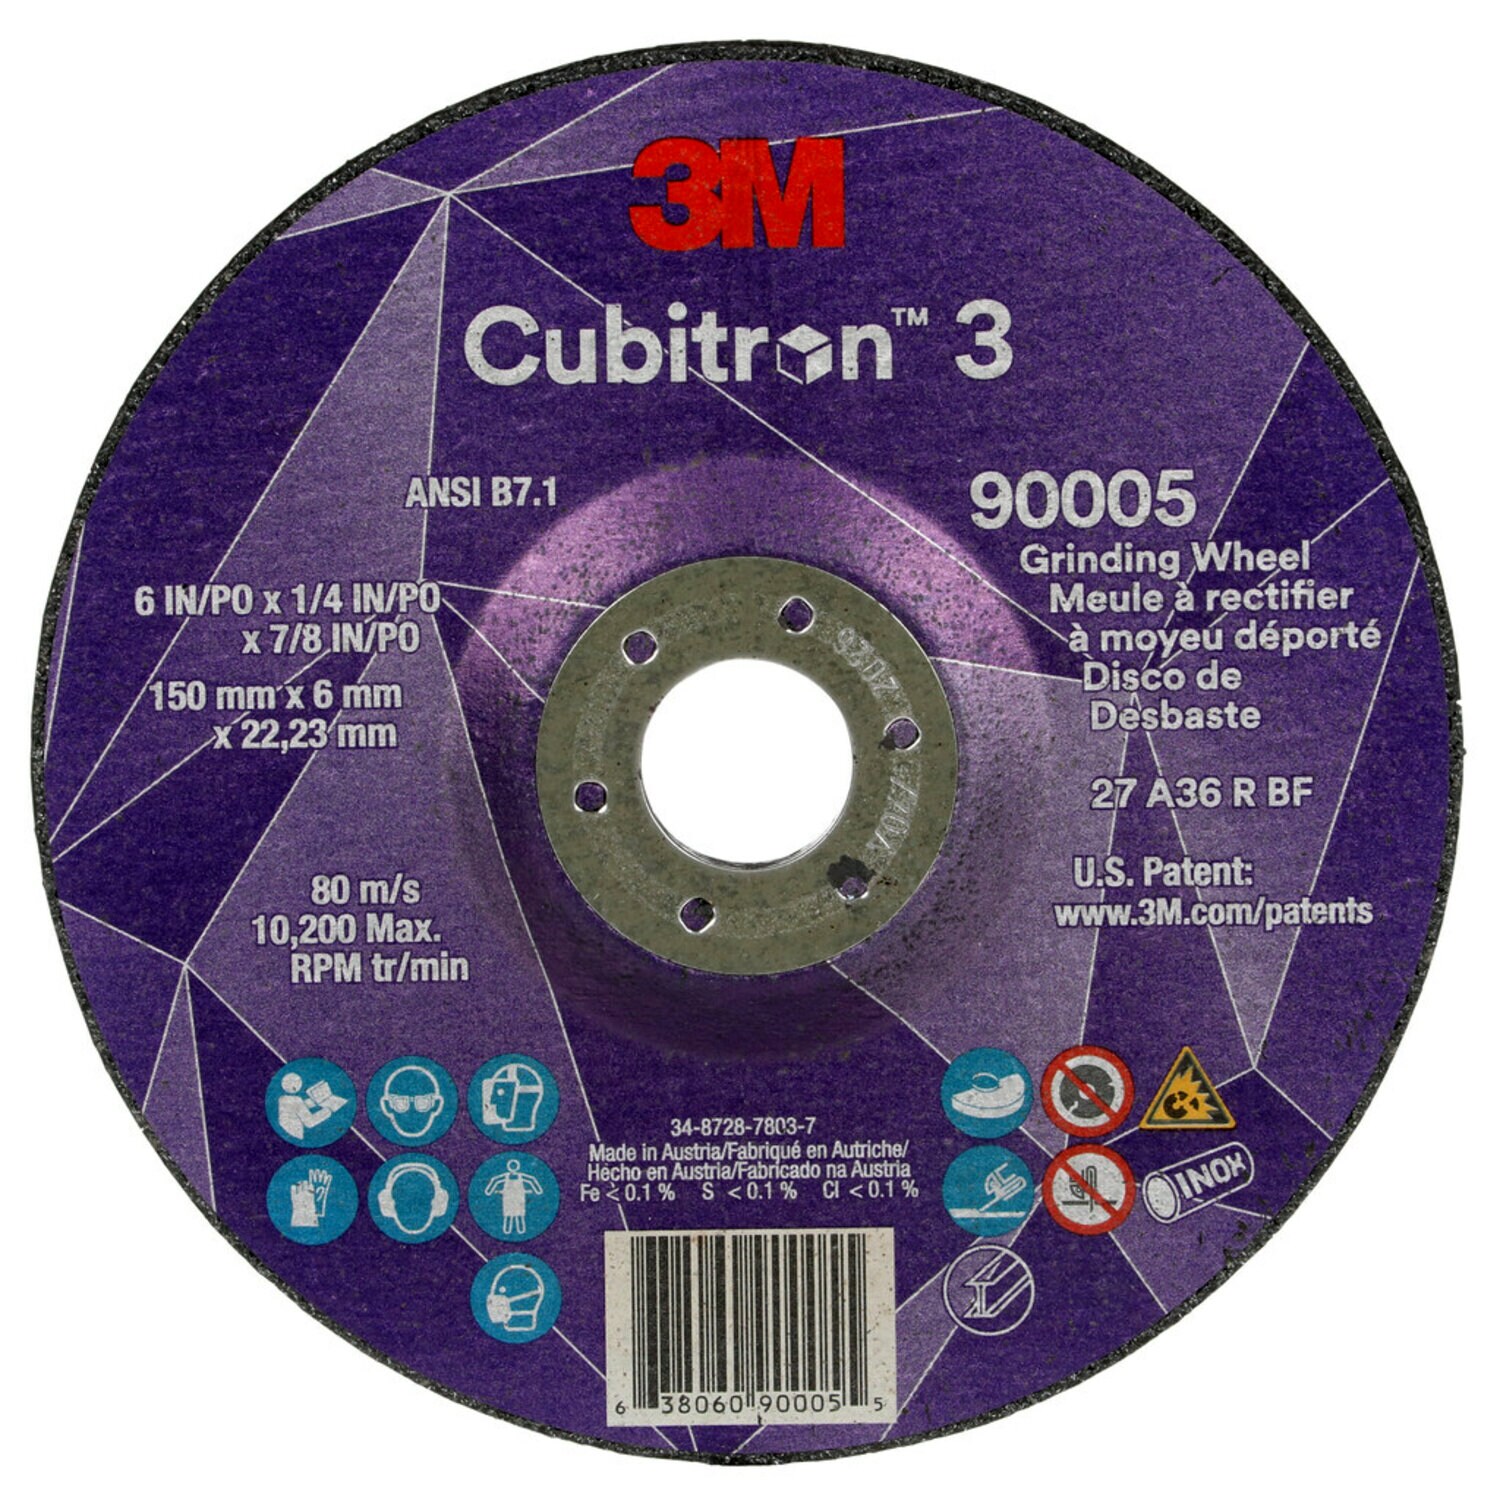 7100313193 - 3M Cubitron 3 Depressed Center Grinding Wheel, 90005, 36+, T27, 6 in x
1/4 in x 7/8 in (150x6x22.23mm) ANSI, 10/Pack, 20 ea/Case